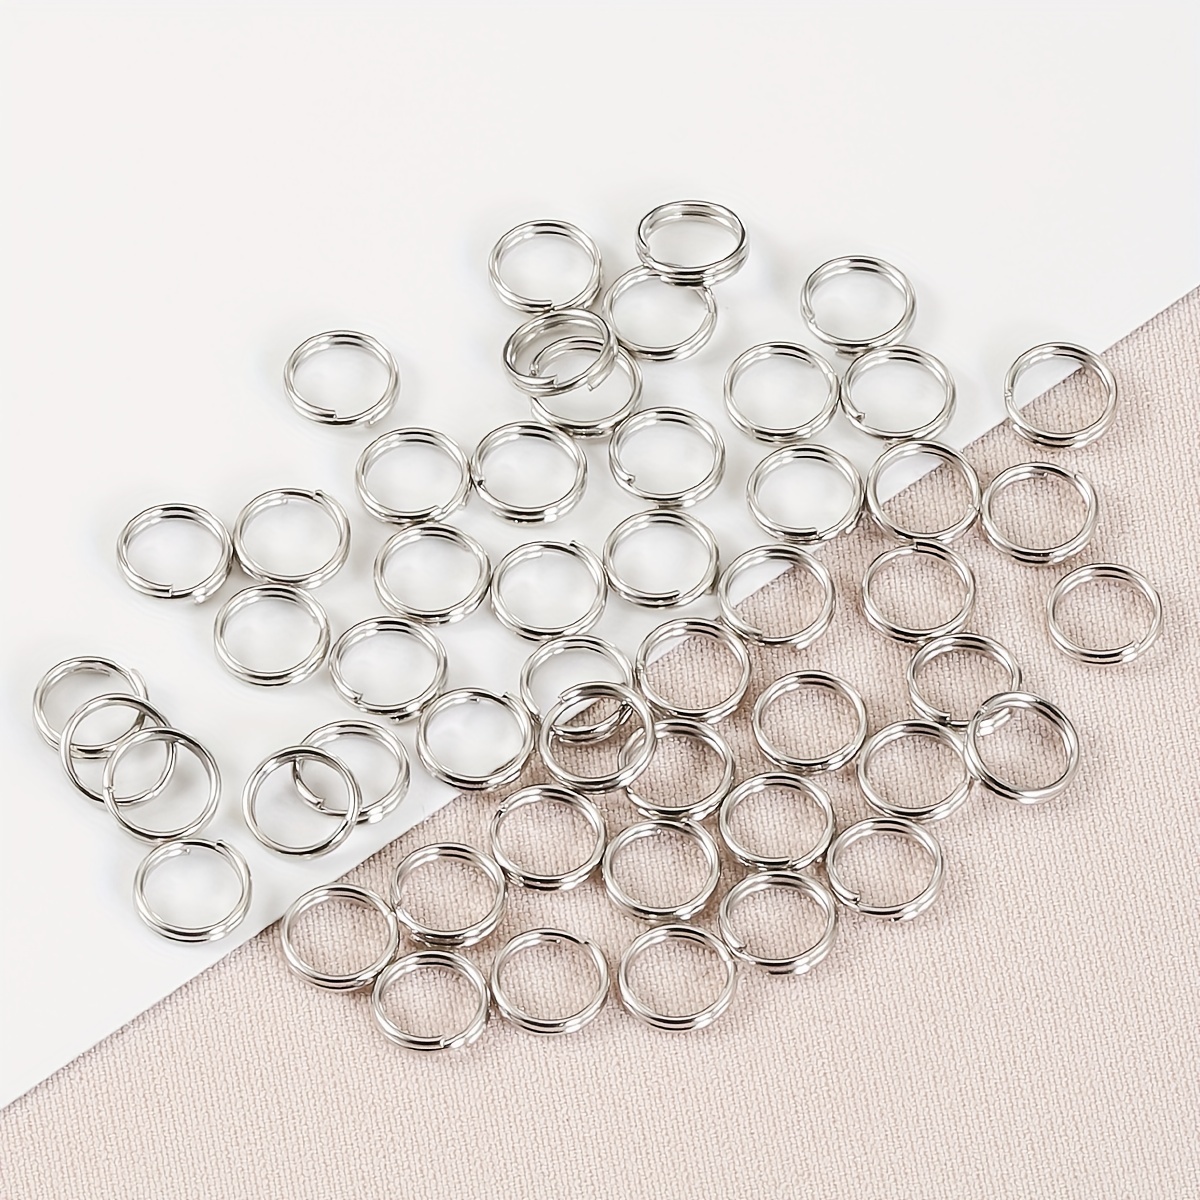 CHOOSE YOUR Color-split Rings 10mm Small Split Rings Open Jump Rings Charm  Metal Key Ring Thick Connector Handmade Jewelry Rings-100pcs 